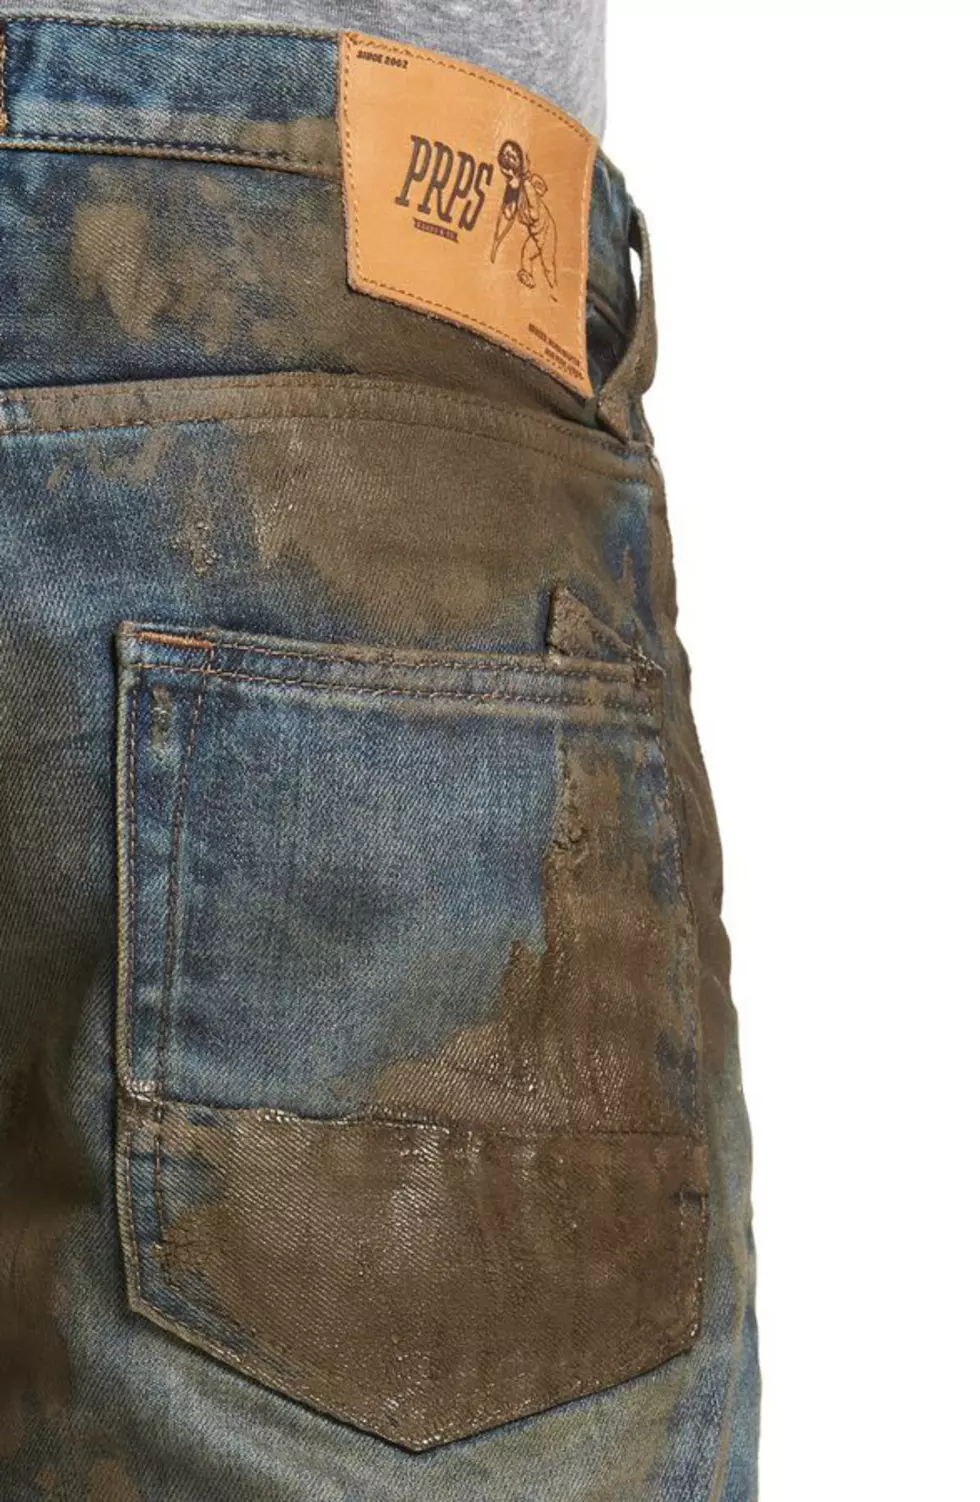 The $425 Pair of Dirty Jeans